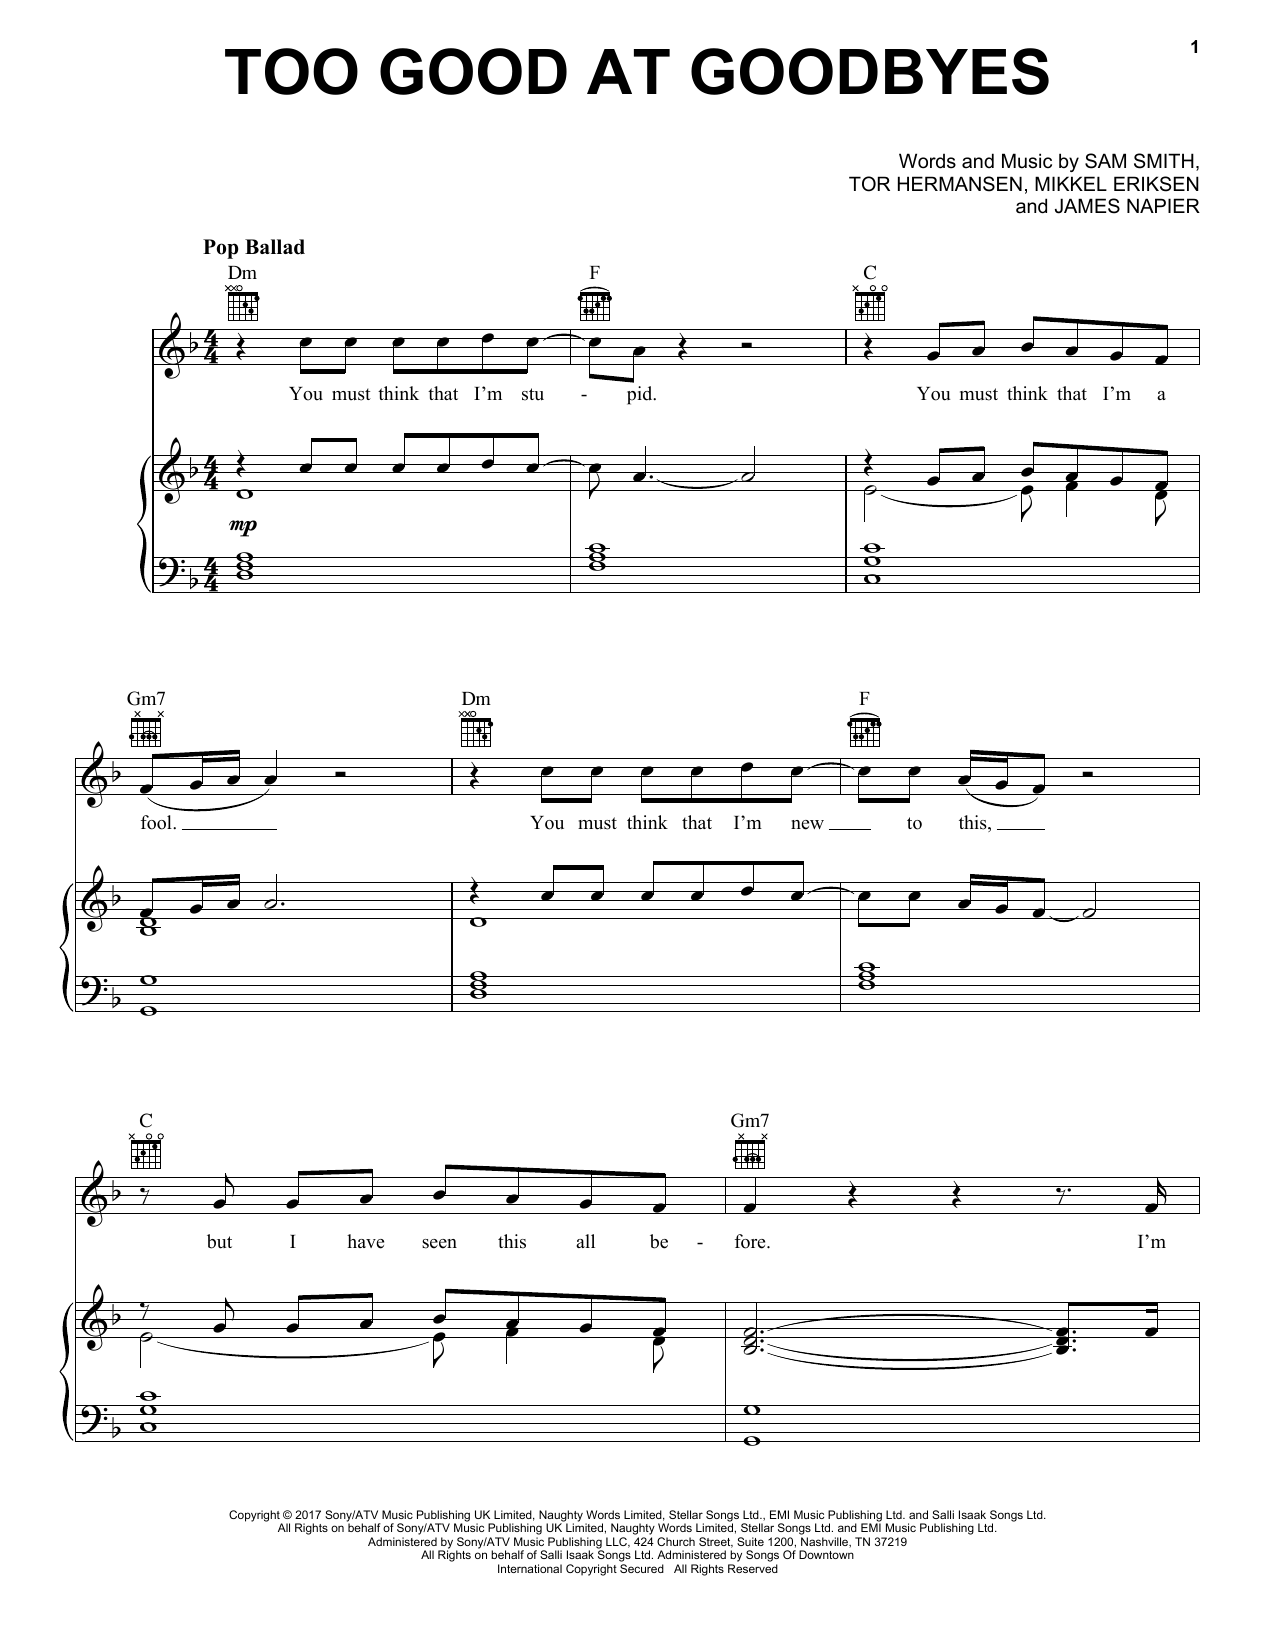 Sam Smith Too Good At Goodbyes Sheet Music Notes Chords Very Easy Piano Download Pop 199203 Pdf